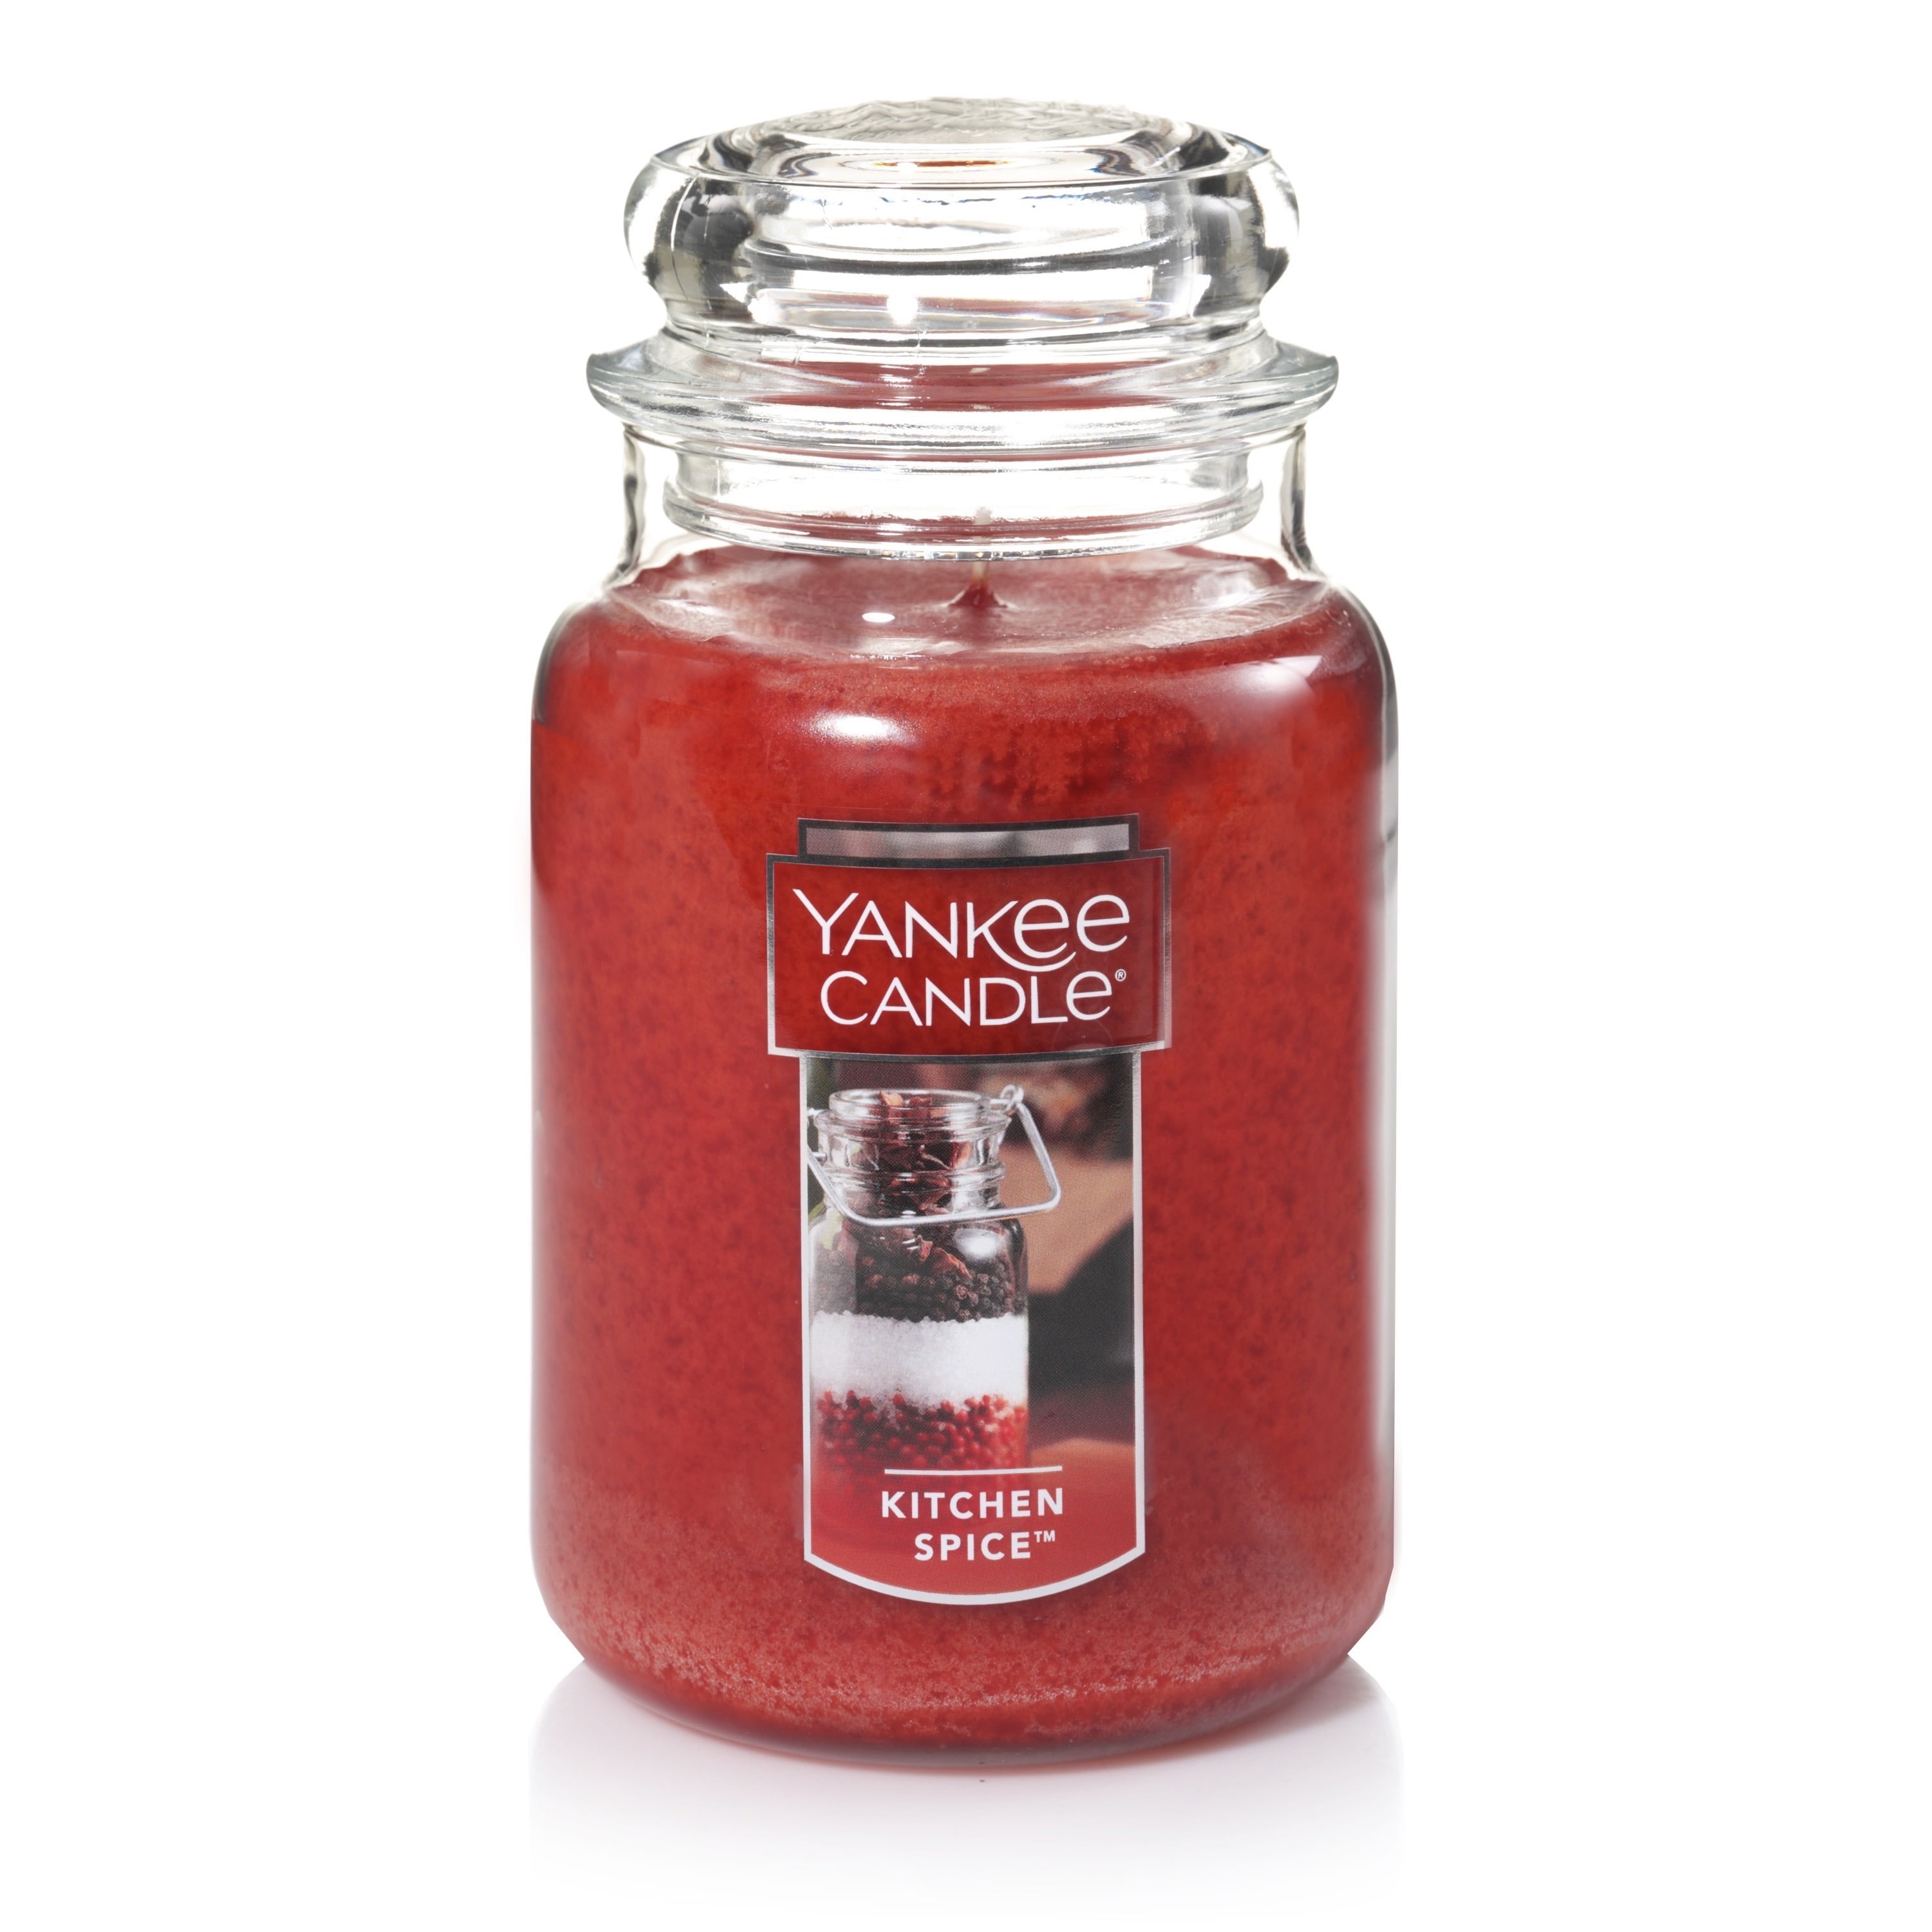 Yankee Candle Kitchen Spice Original Large Jar Scented Candle